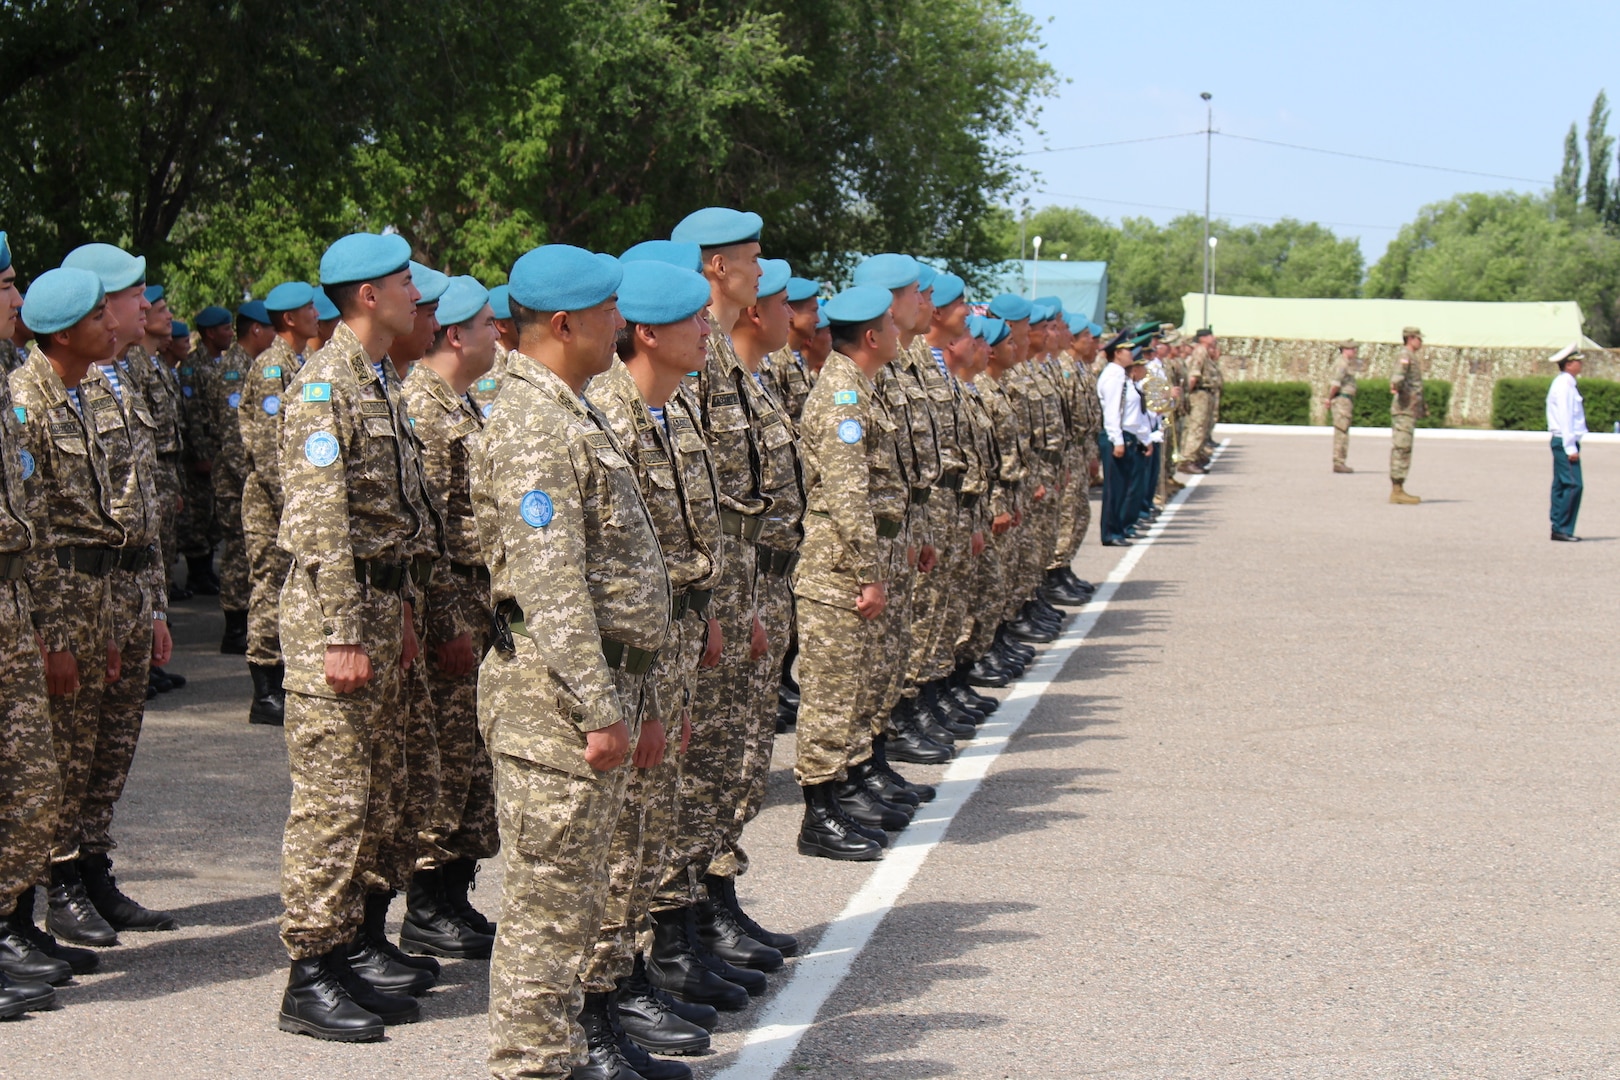 Kazakhstani Ground Forces' Soldiers stand in formation alongside Soldiers from other participating nations at the opening ceremony for Steppe Eagle 19, June 17, 2019, at Illisky Training Area near Almaty, Kazakhstan. Steppe Eagle 19 is a U.S. Army Central-led exercise that promotes regional stability and interoperability in the Central and South Asia region. (Photo by U.S. Army Maj. Kevin Sandell)